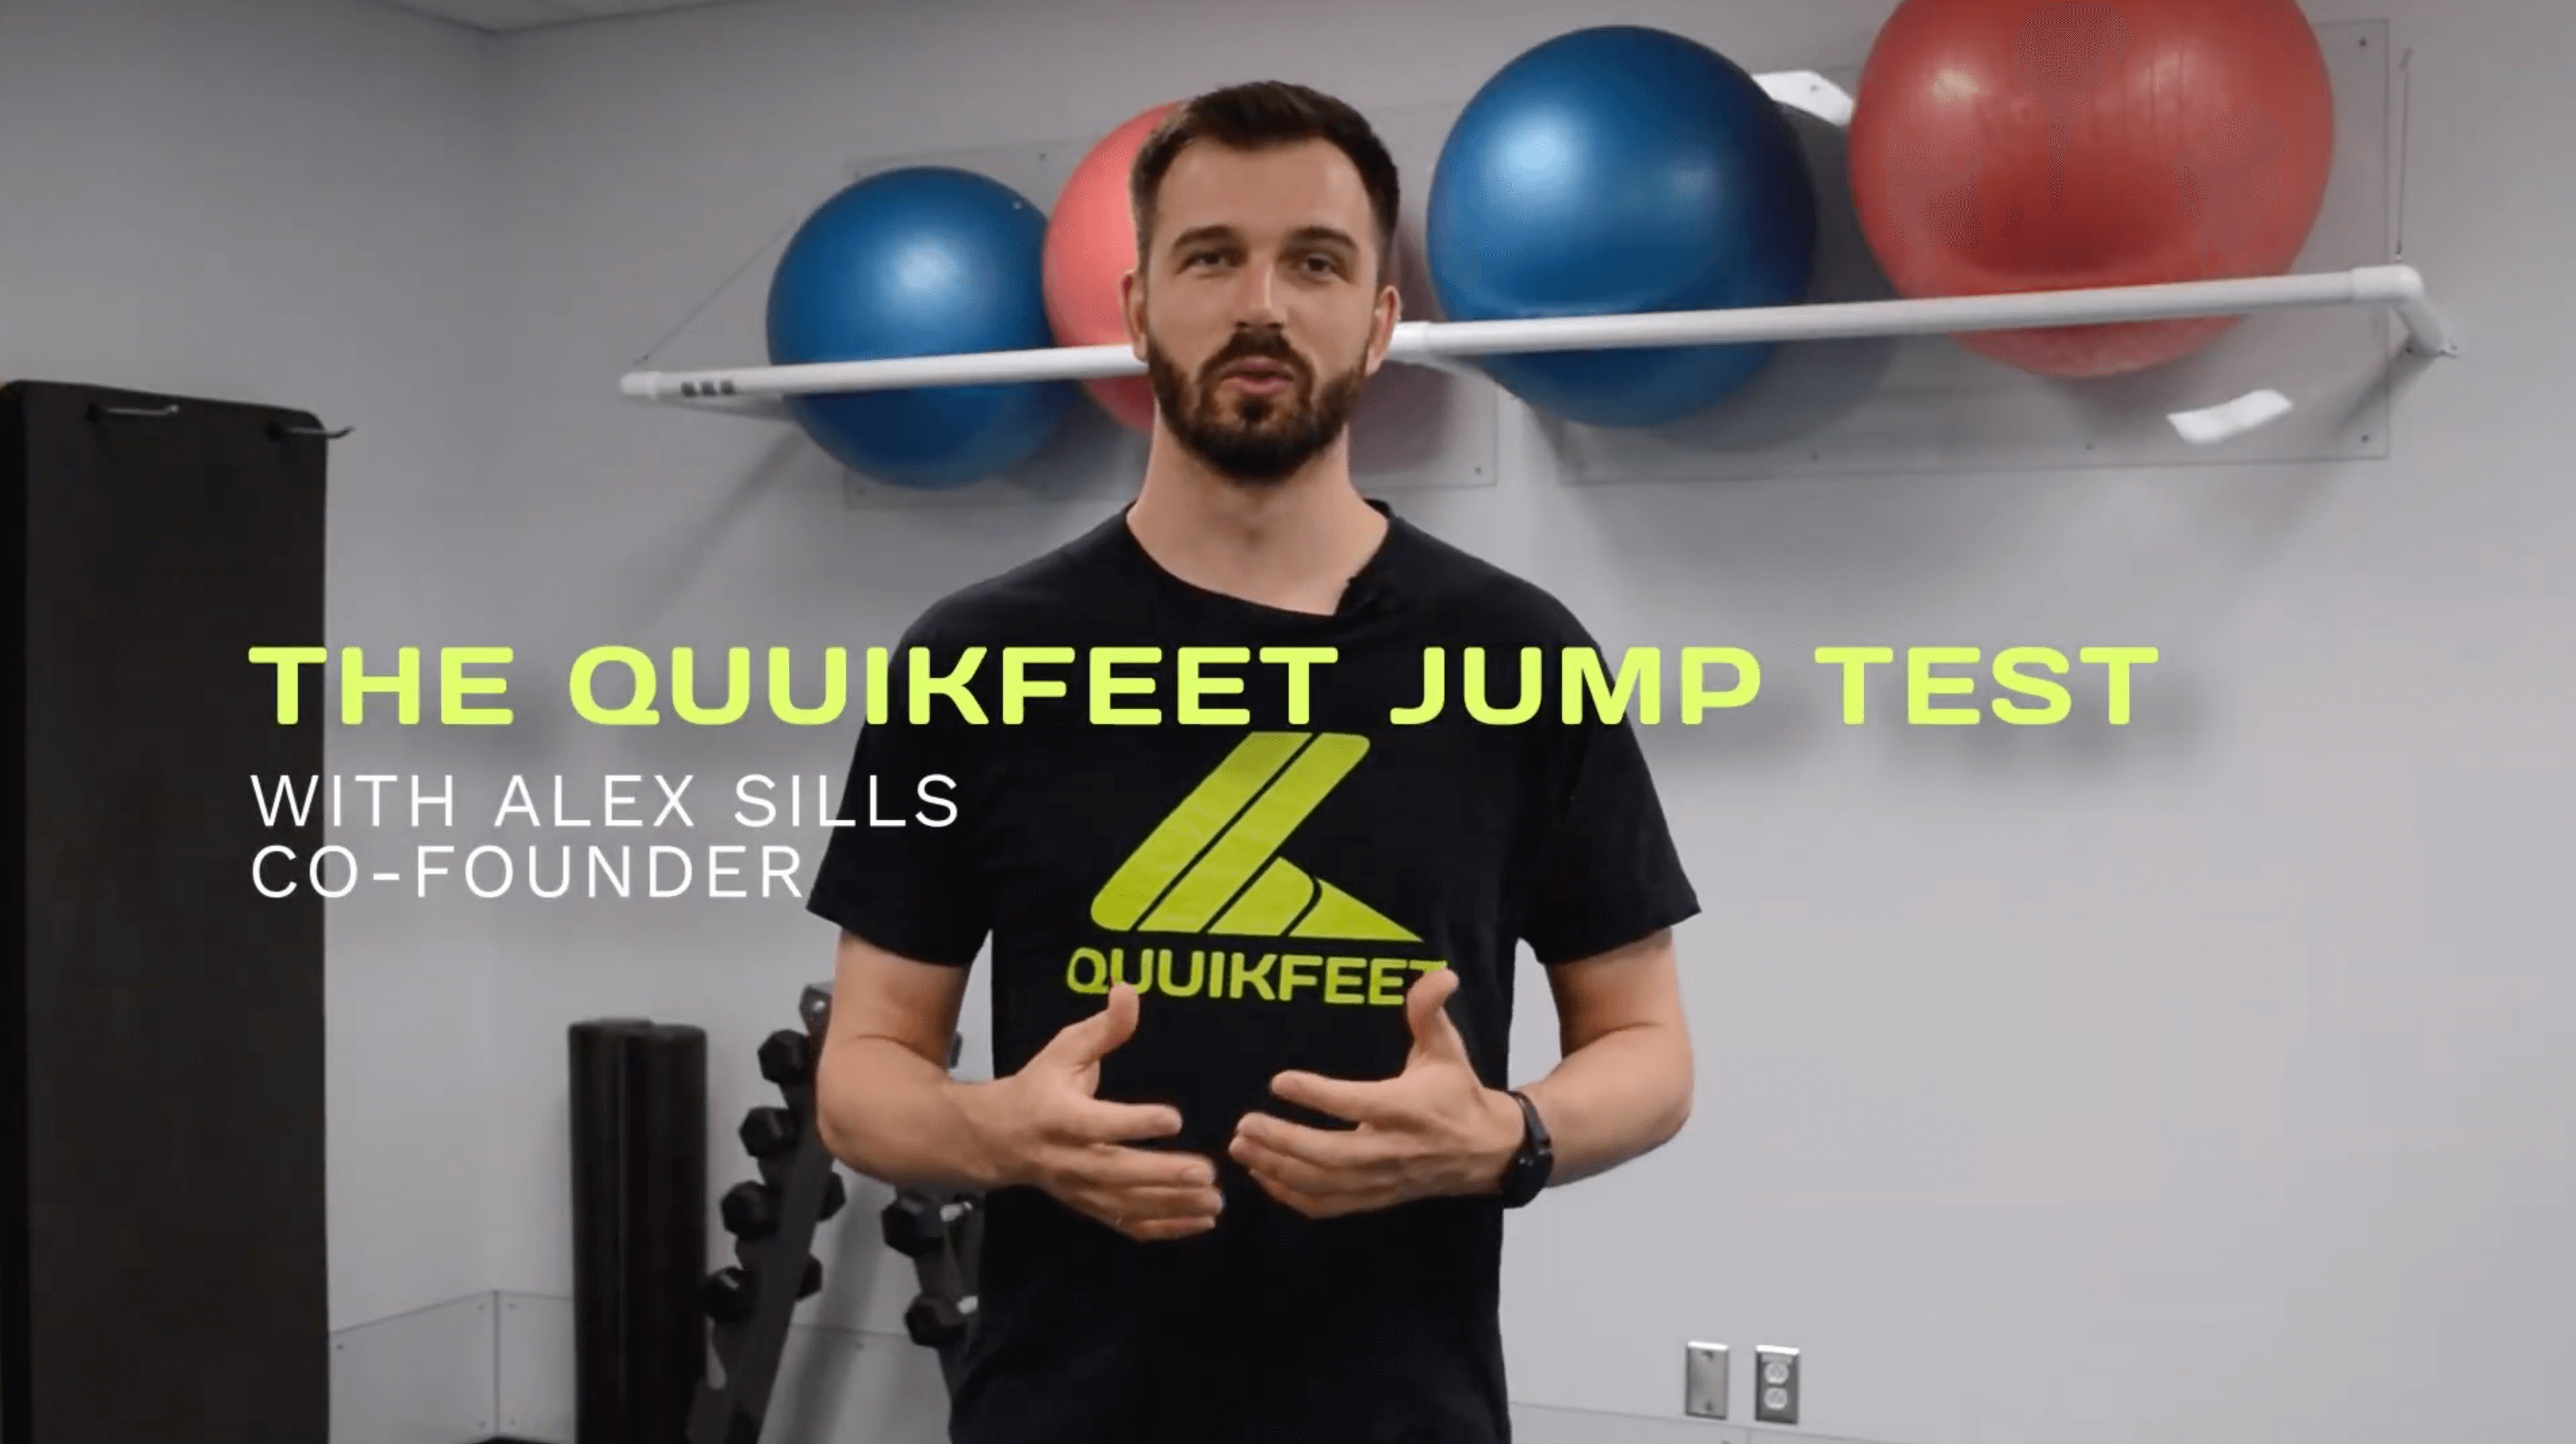 Load video: Video explaining how to fit Quuikfeet in your skates.